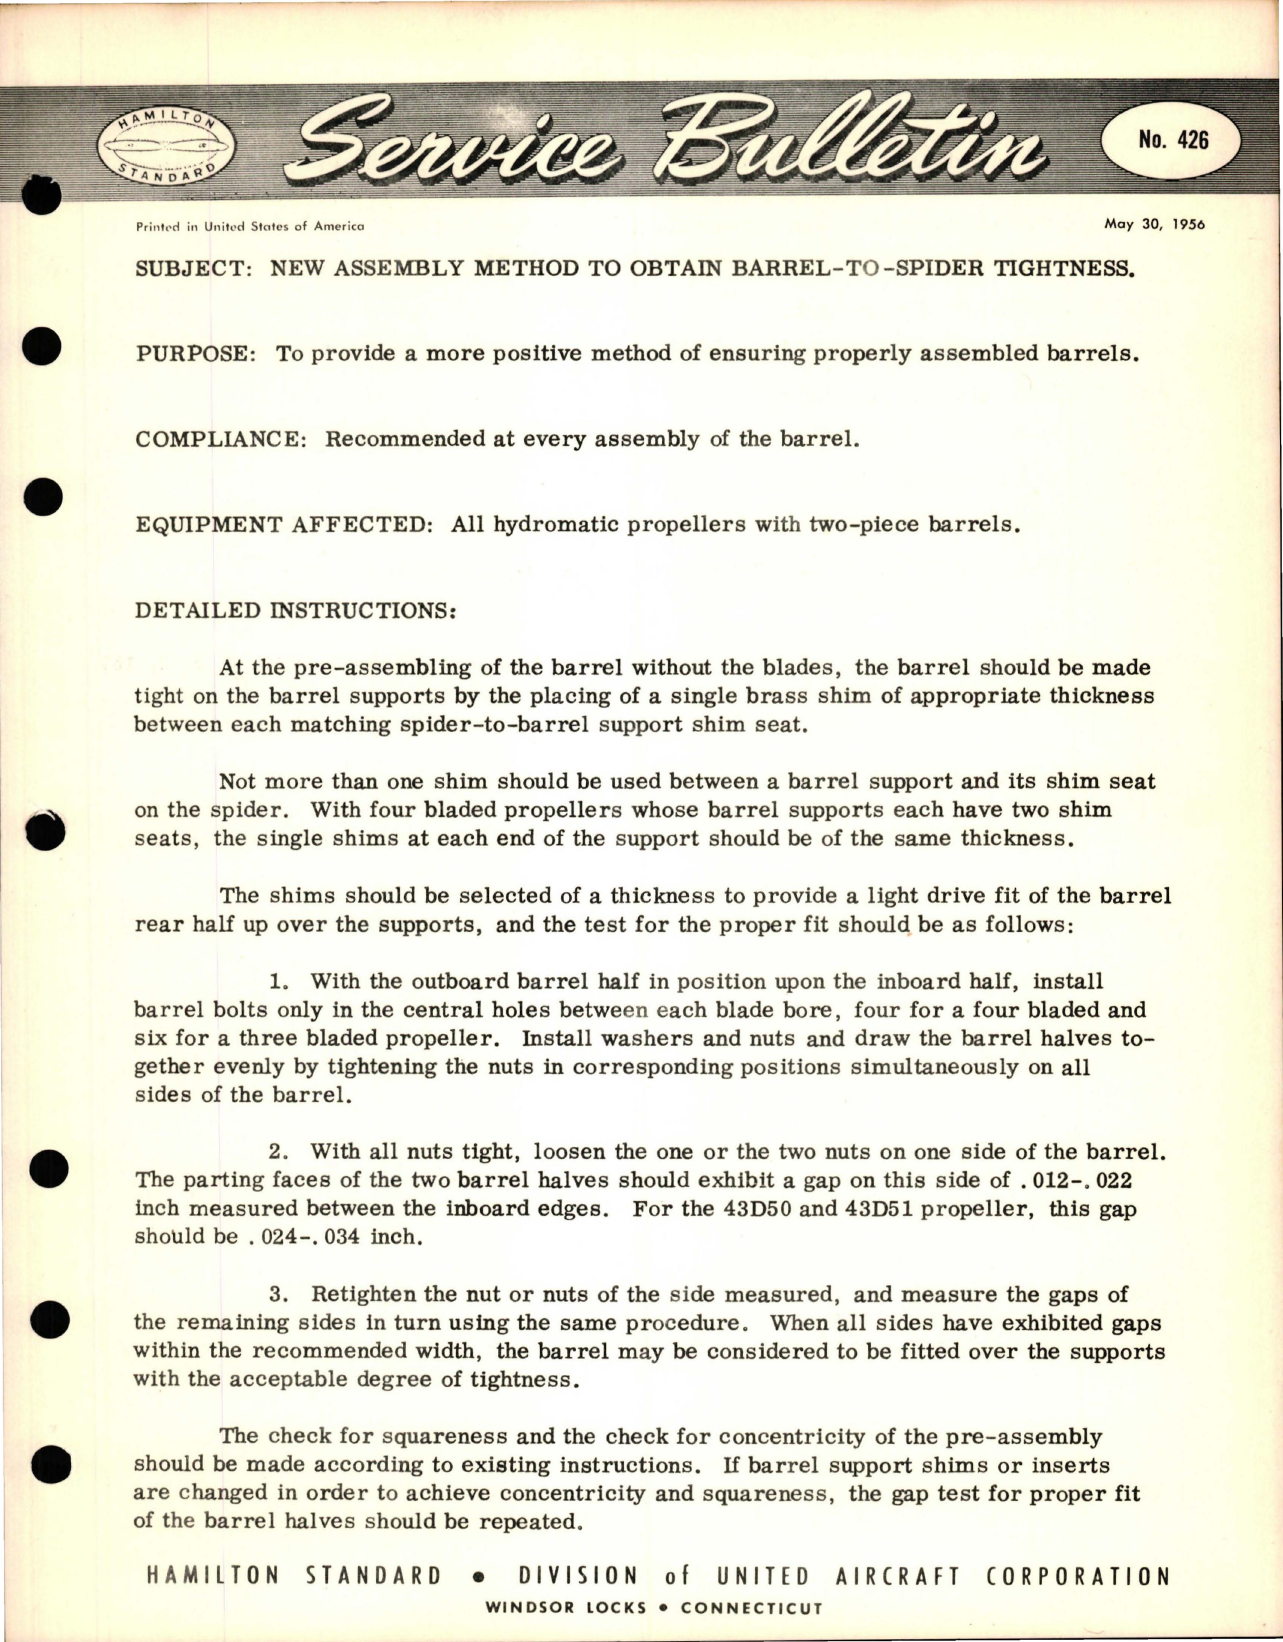 Sample page 1 from AirCorps Library document: New Assembly Method to Obtain Barrel-to-Spider Tightness